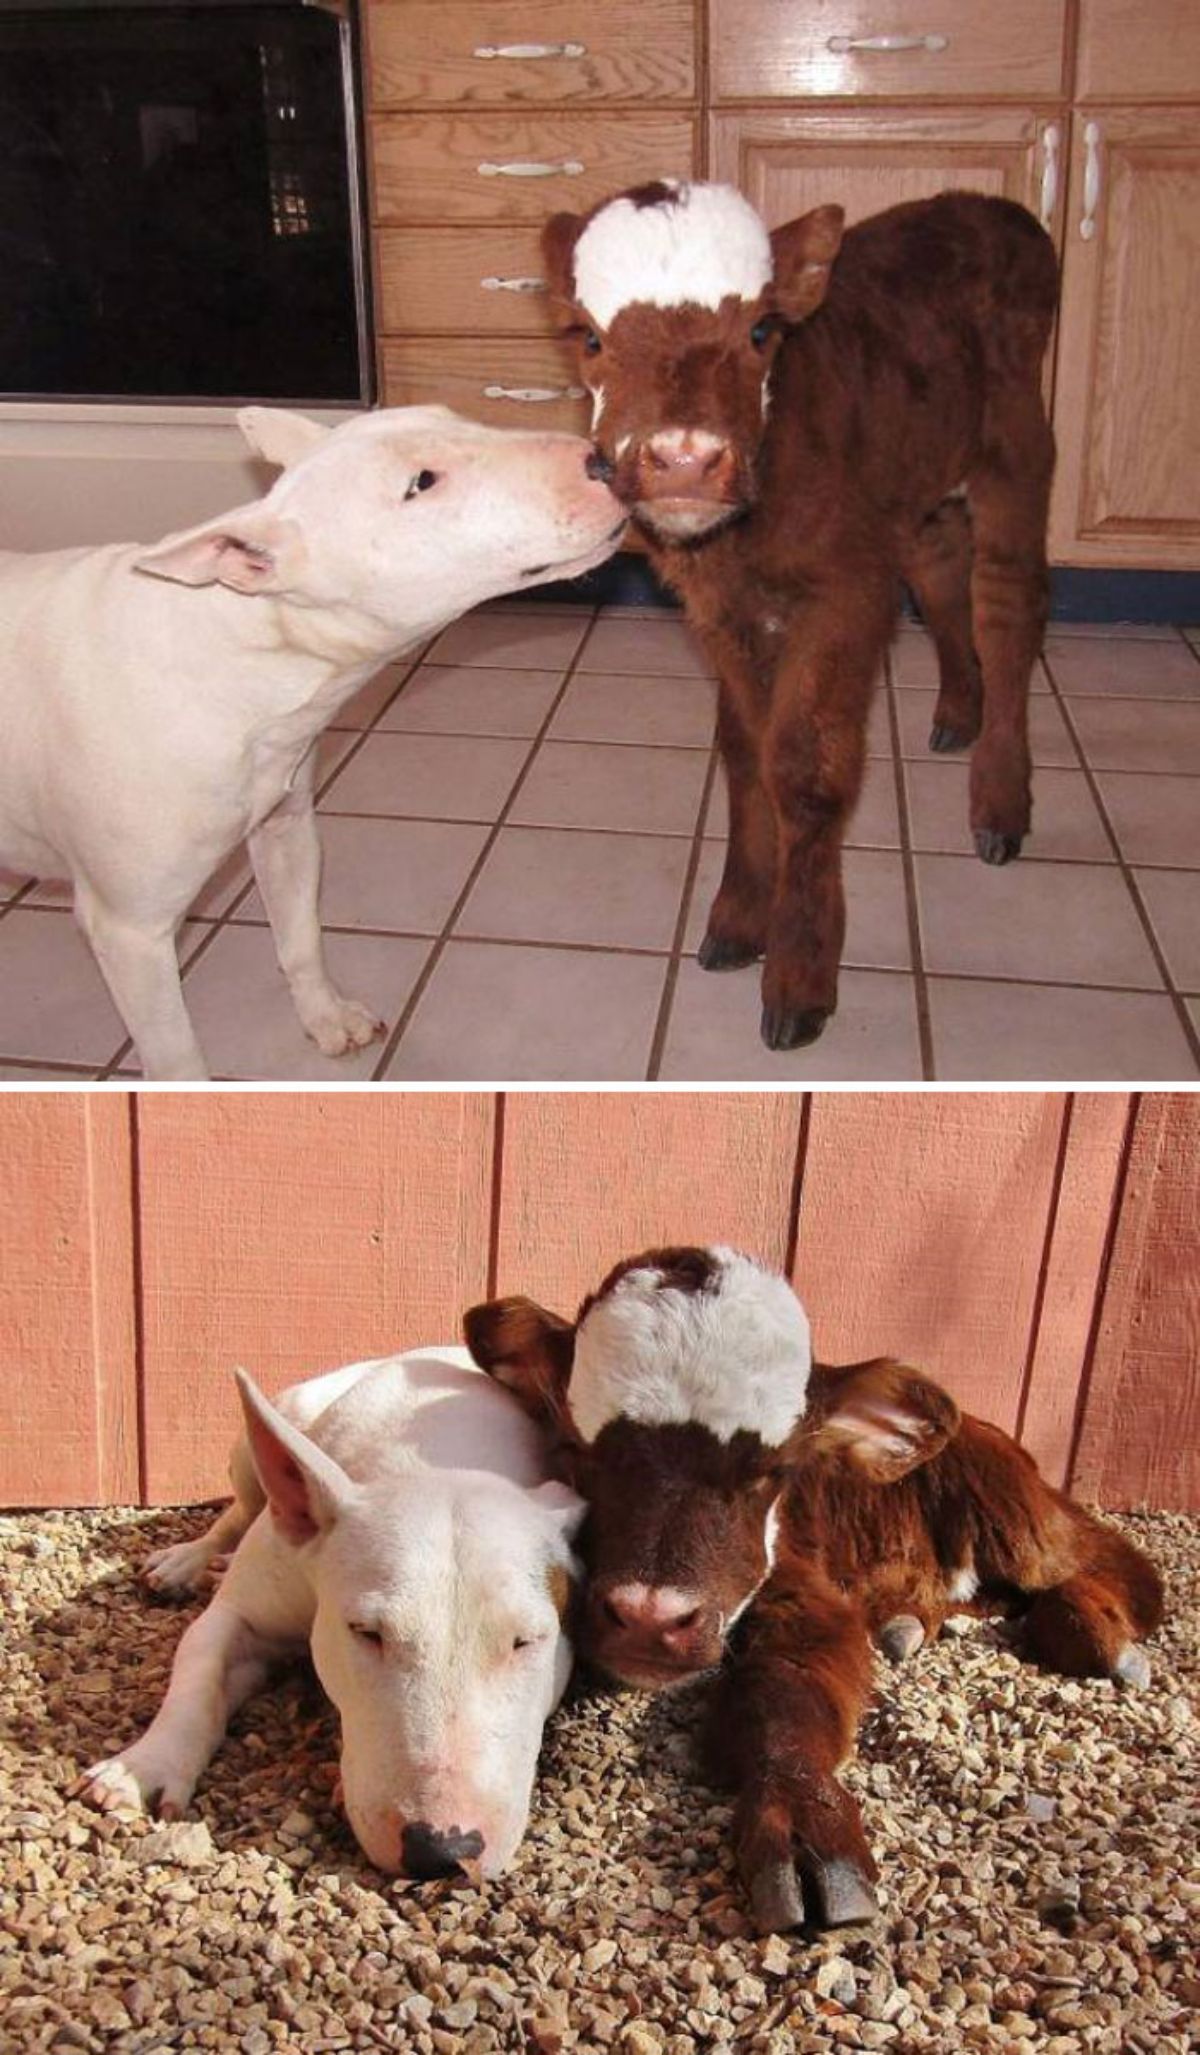 2 photos of a brown and white calf with a white dog, a brown and white calf getting nuzzled by a white dog in the first photo, and the two of them cuddling together in the second photo